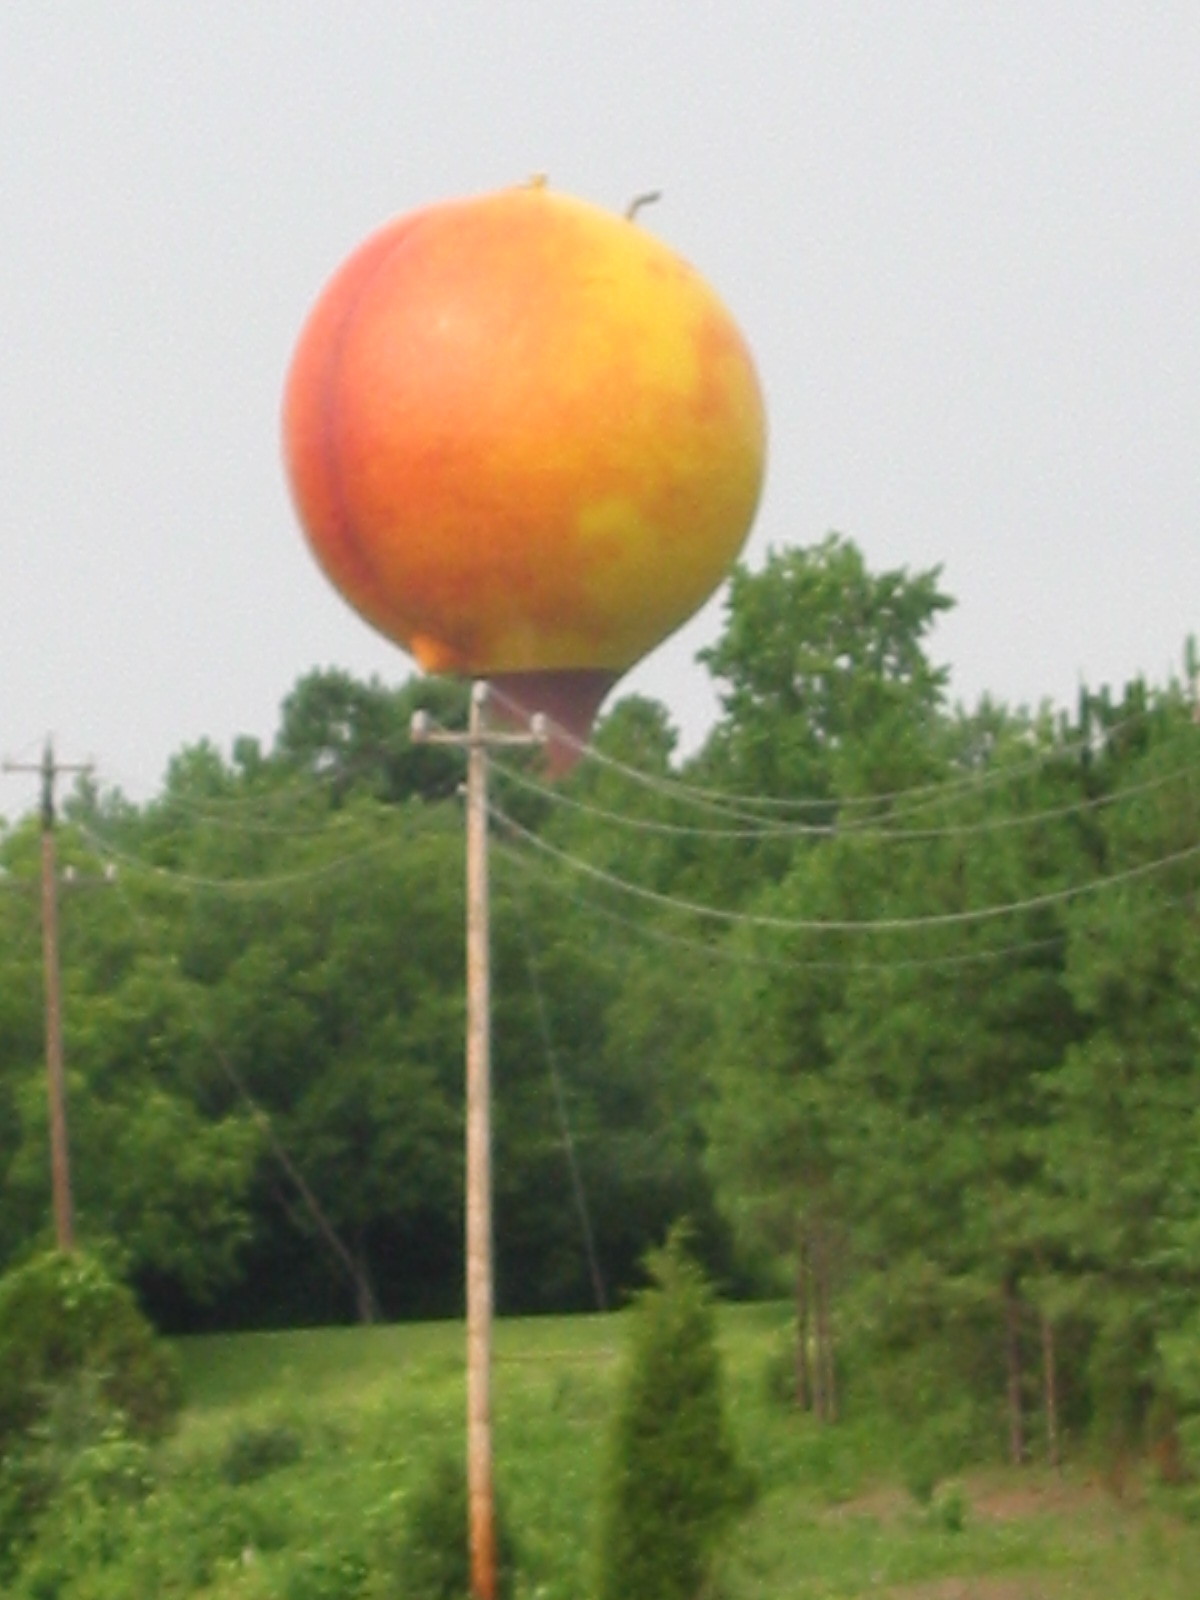 Well, not quite; it's actually a giant, nicely decorated water tower in South Carolina.  Did you know that the state of South Carolina produces more peaches than Georgia?
Of course, it's yet to produce an Allman Brothers Band.